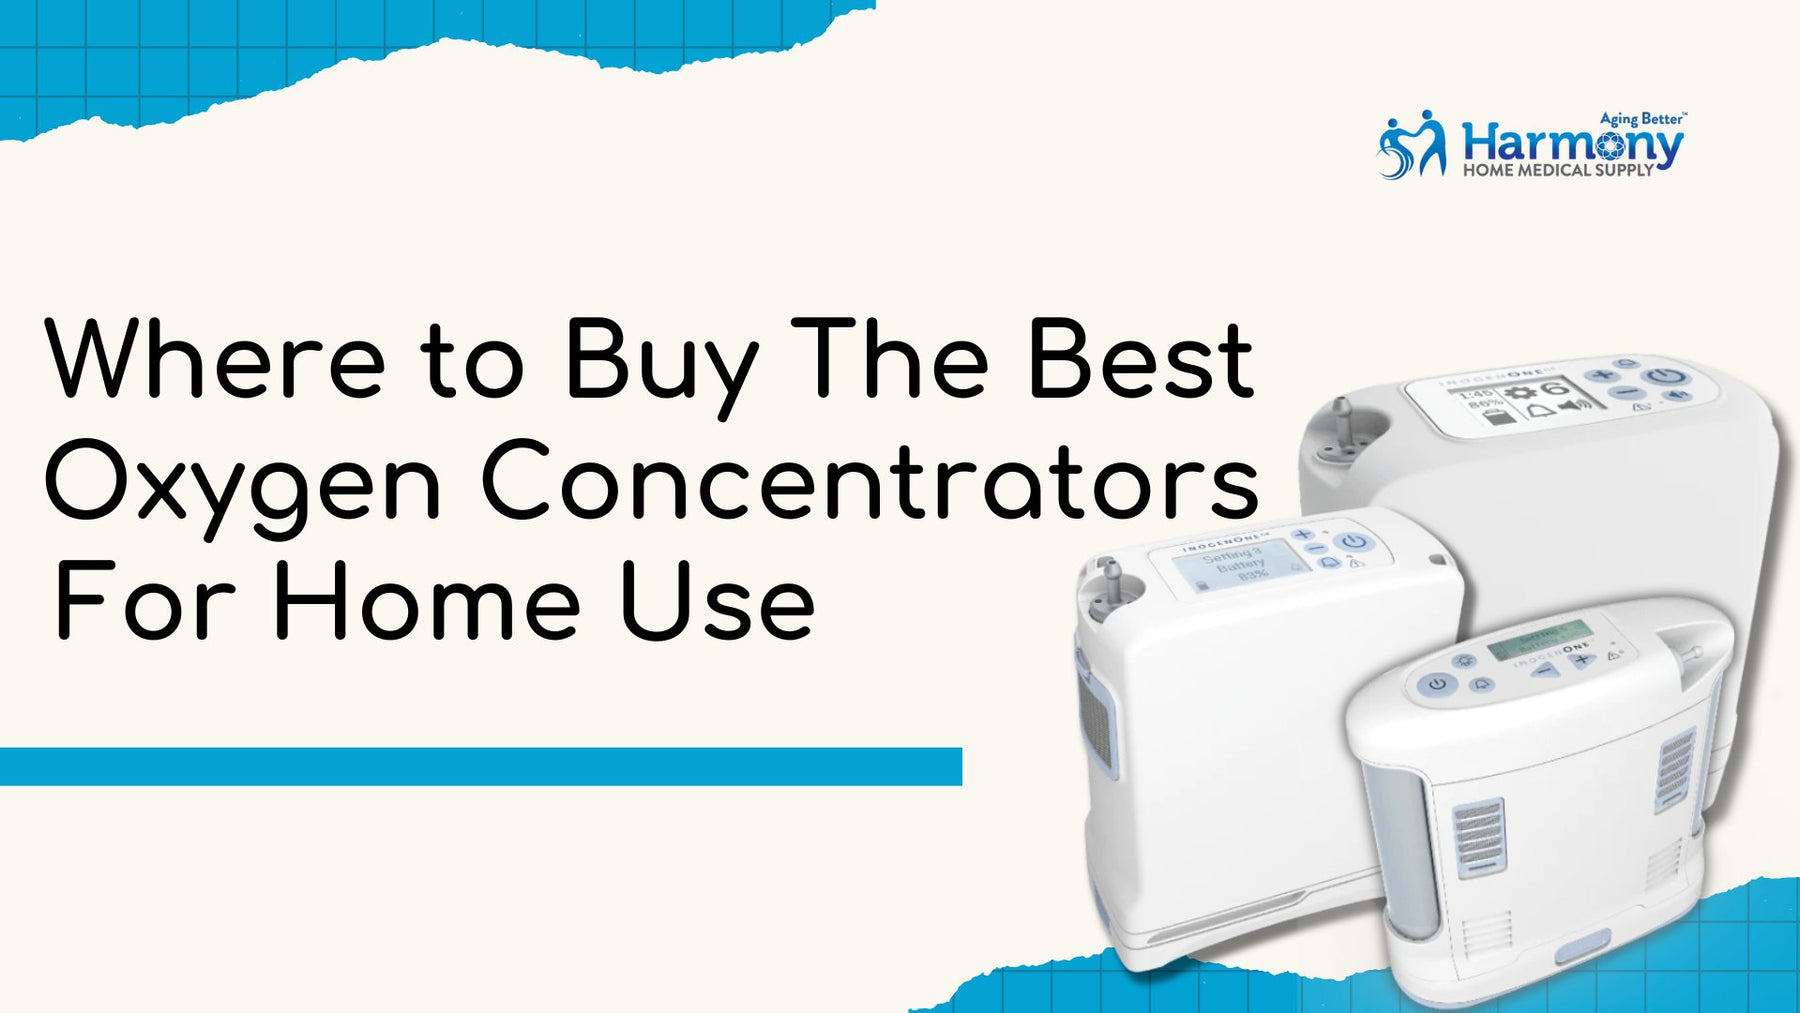 Where to Buy The Best Oxygen Concentrator for Home Use? - Harmony Home Medical Supply